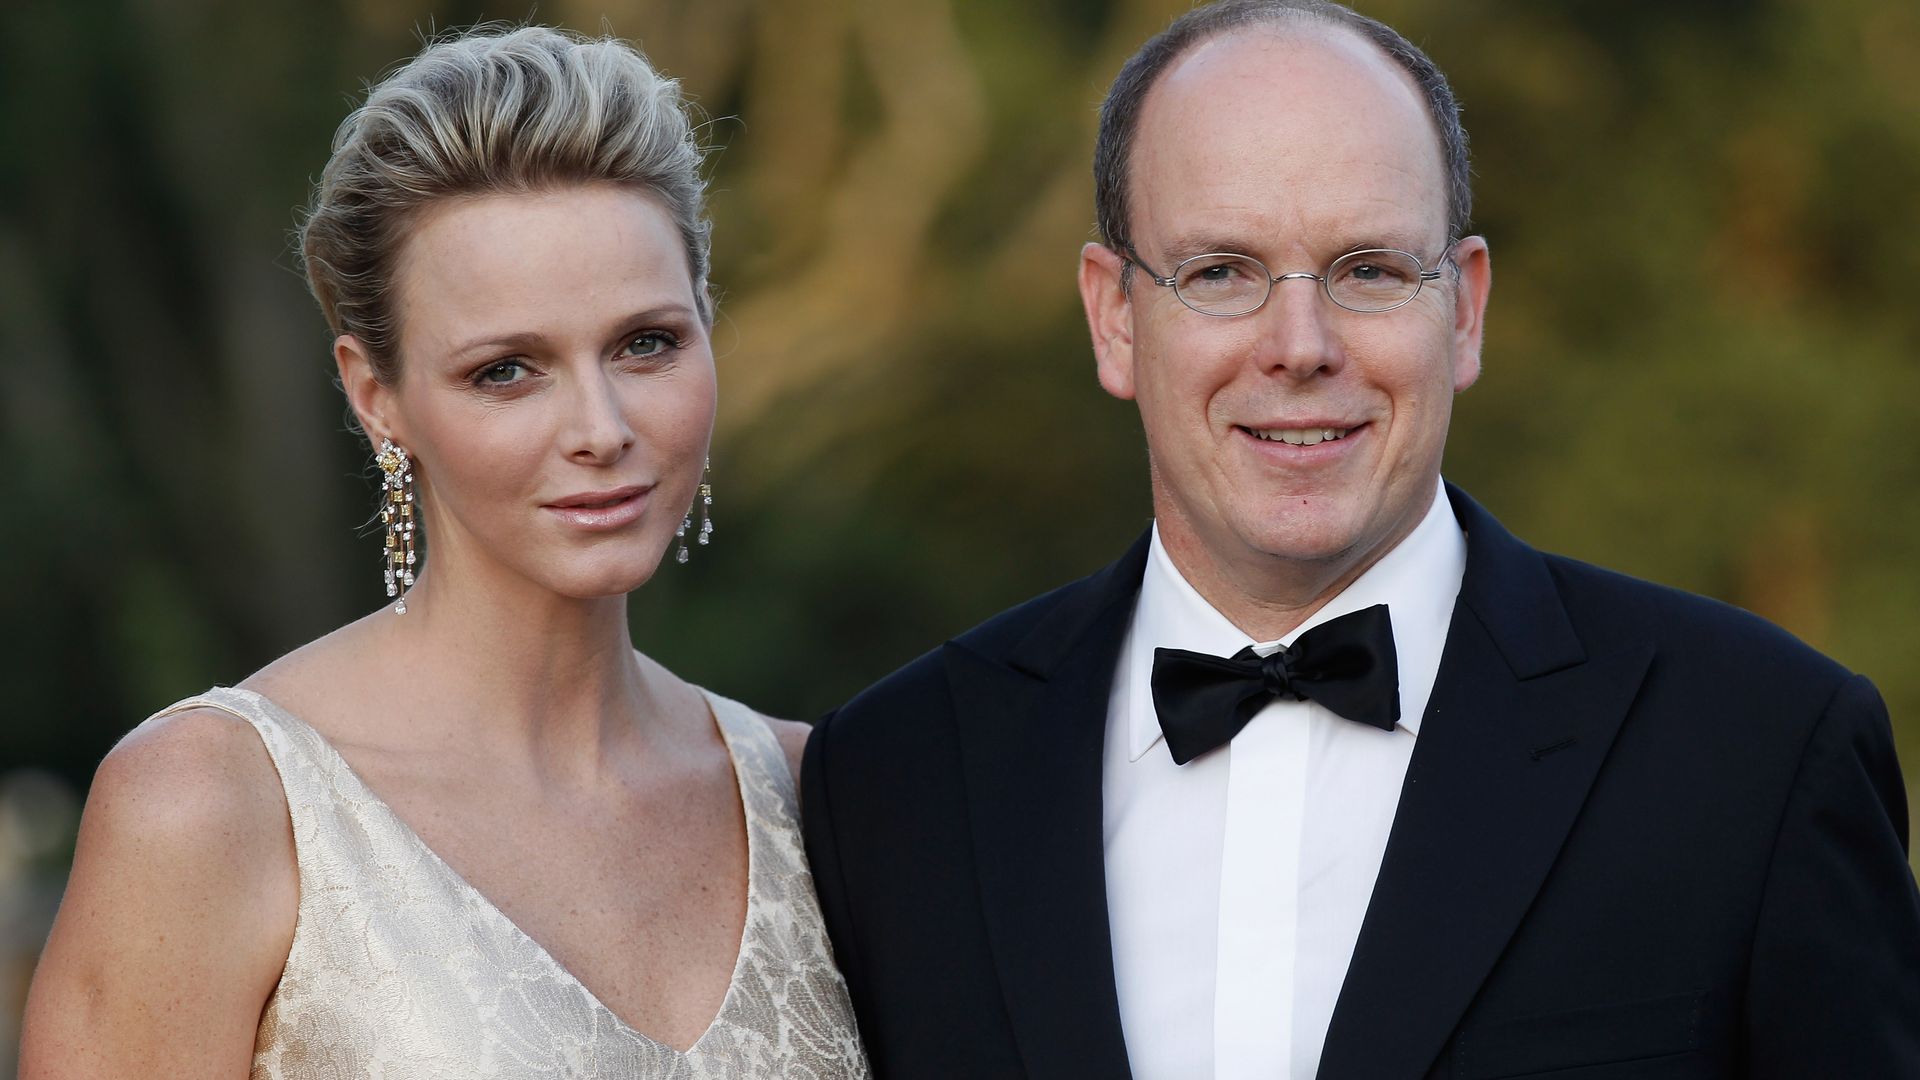 Princess Charlene and Prince Albert smiling in a close-up photo 